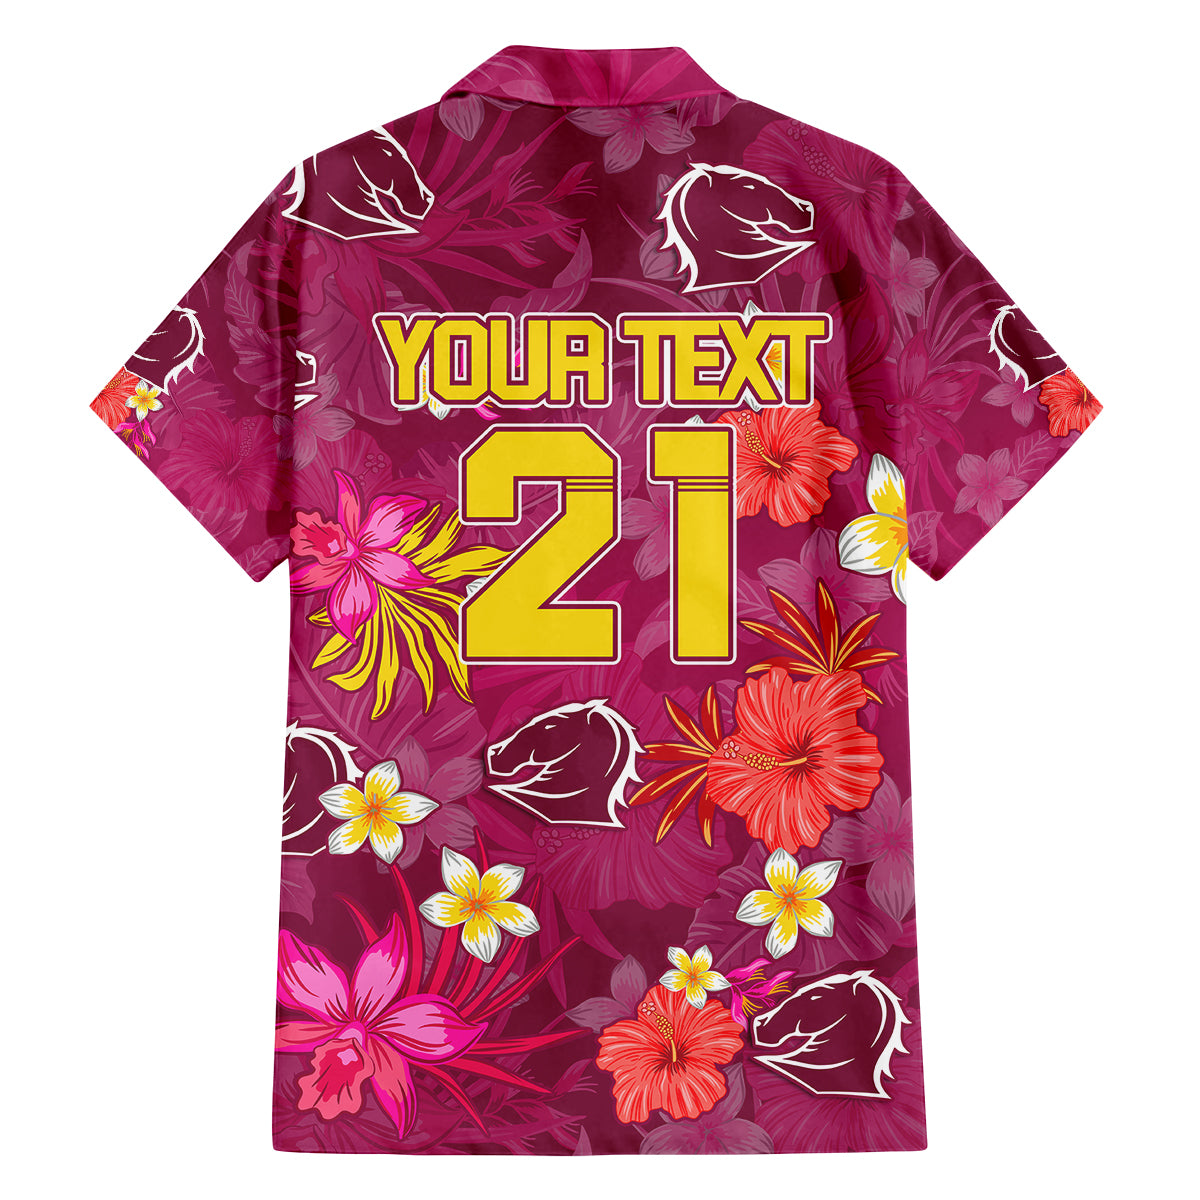 custom-broncos-rugby-family-matching-short-sleeve-bodycon-dress-and-hawaiian-shirt-beautiful-floral-pattern-spring-summer-vibe